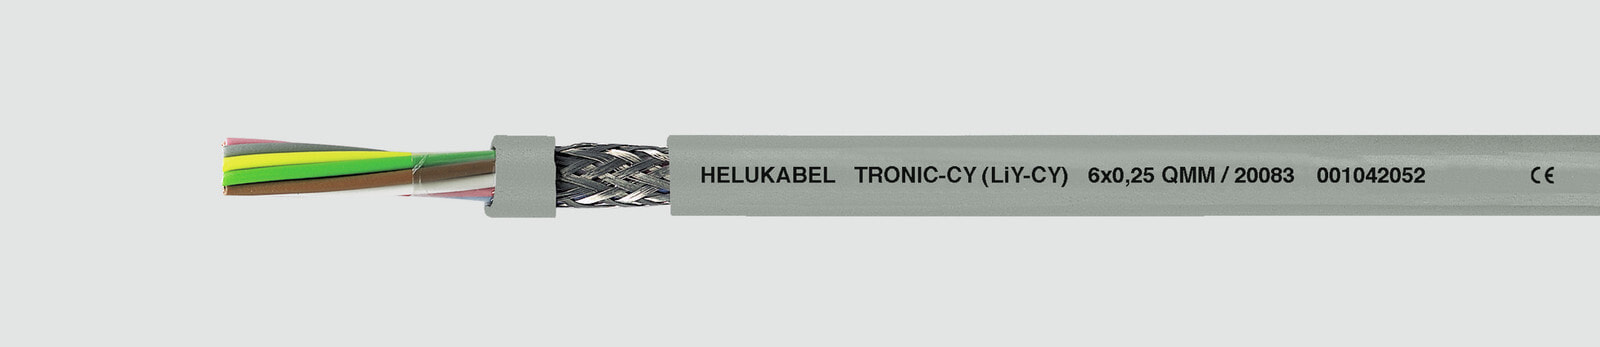 Helukabel TRONIC-CY (LiY-CY) - Low voltage cable - Grey - Polyvinyl chloride (PVC) - Cooper - 0.75 mm² - 57 kg/km